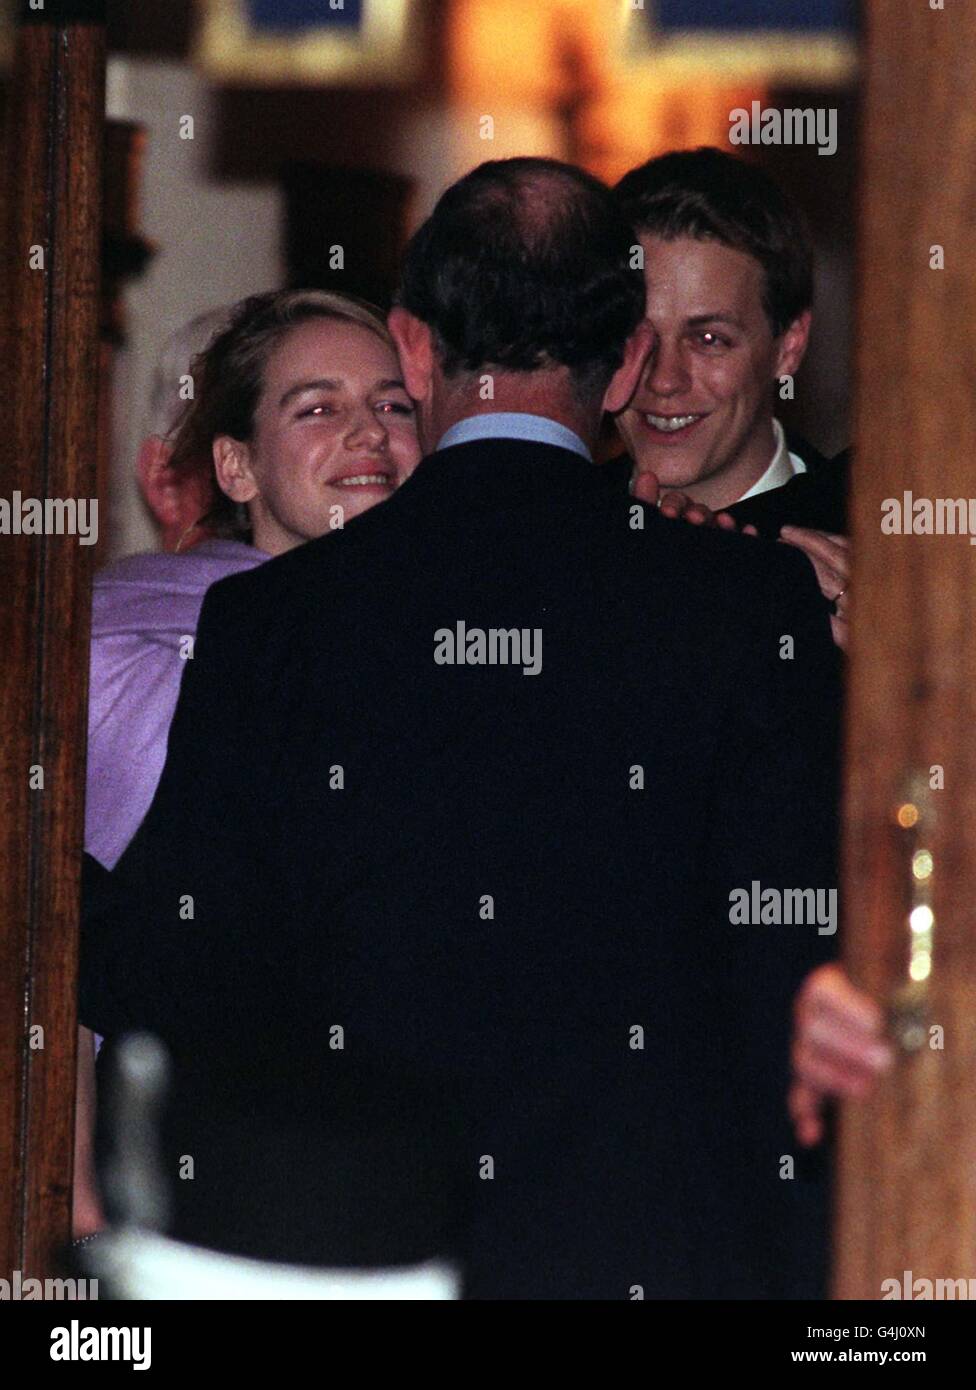 The Prince of Wales bids farewell to Camilla Parker Bowels' children, Laura (left) and Tom before he leaves the Ritz Hotel in London after attending the 50th birthday party of Camilla's sister, Annabel Elliott. Stock Photo